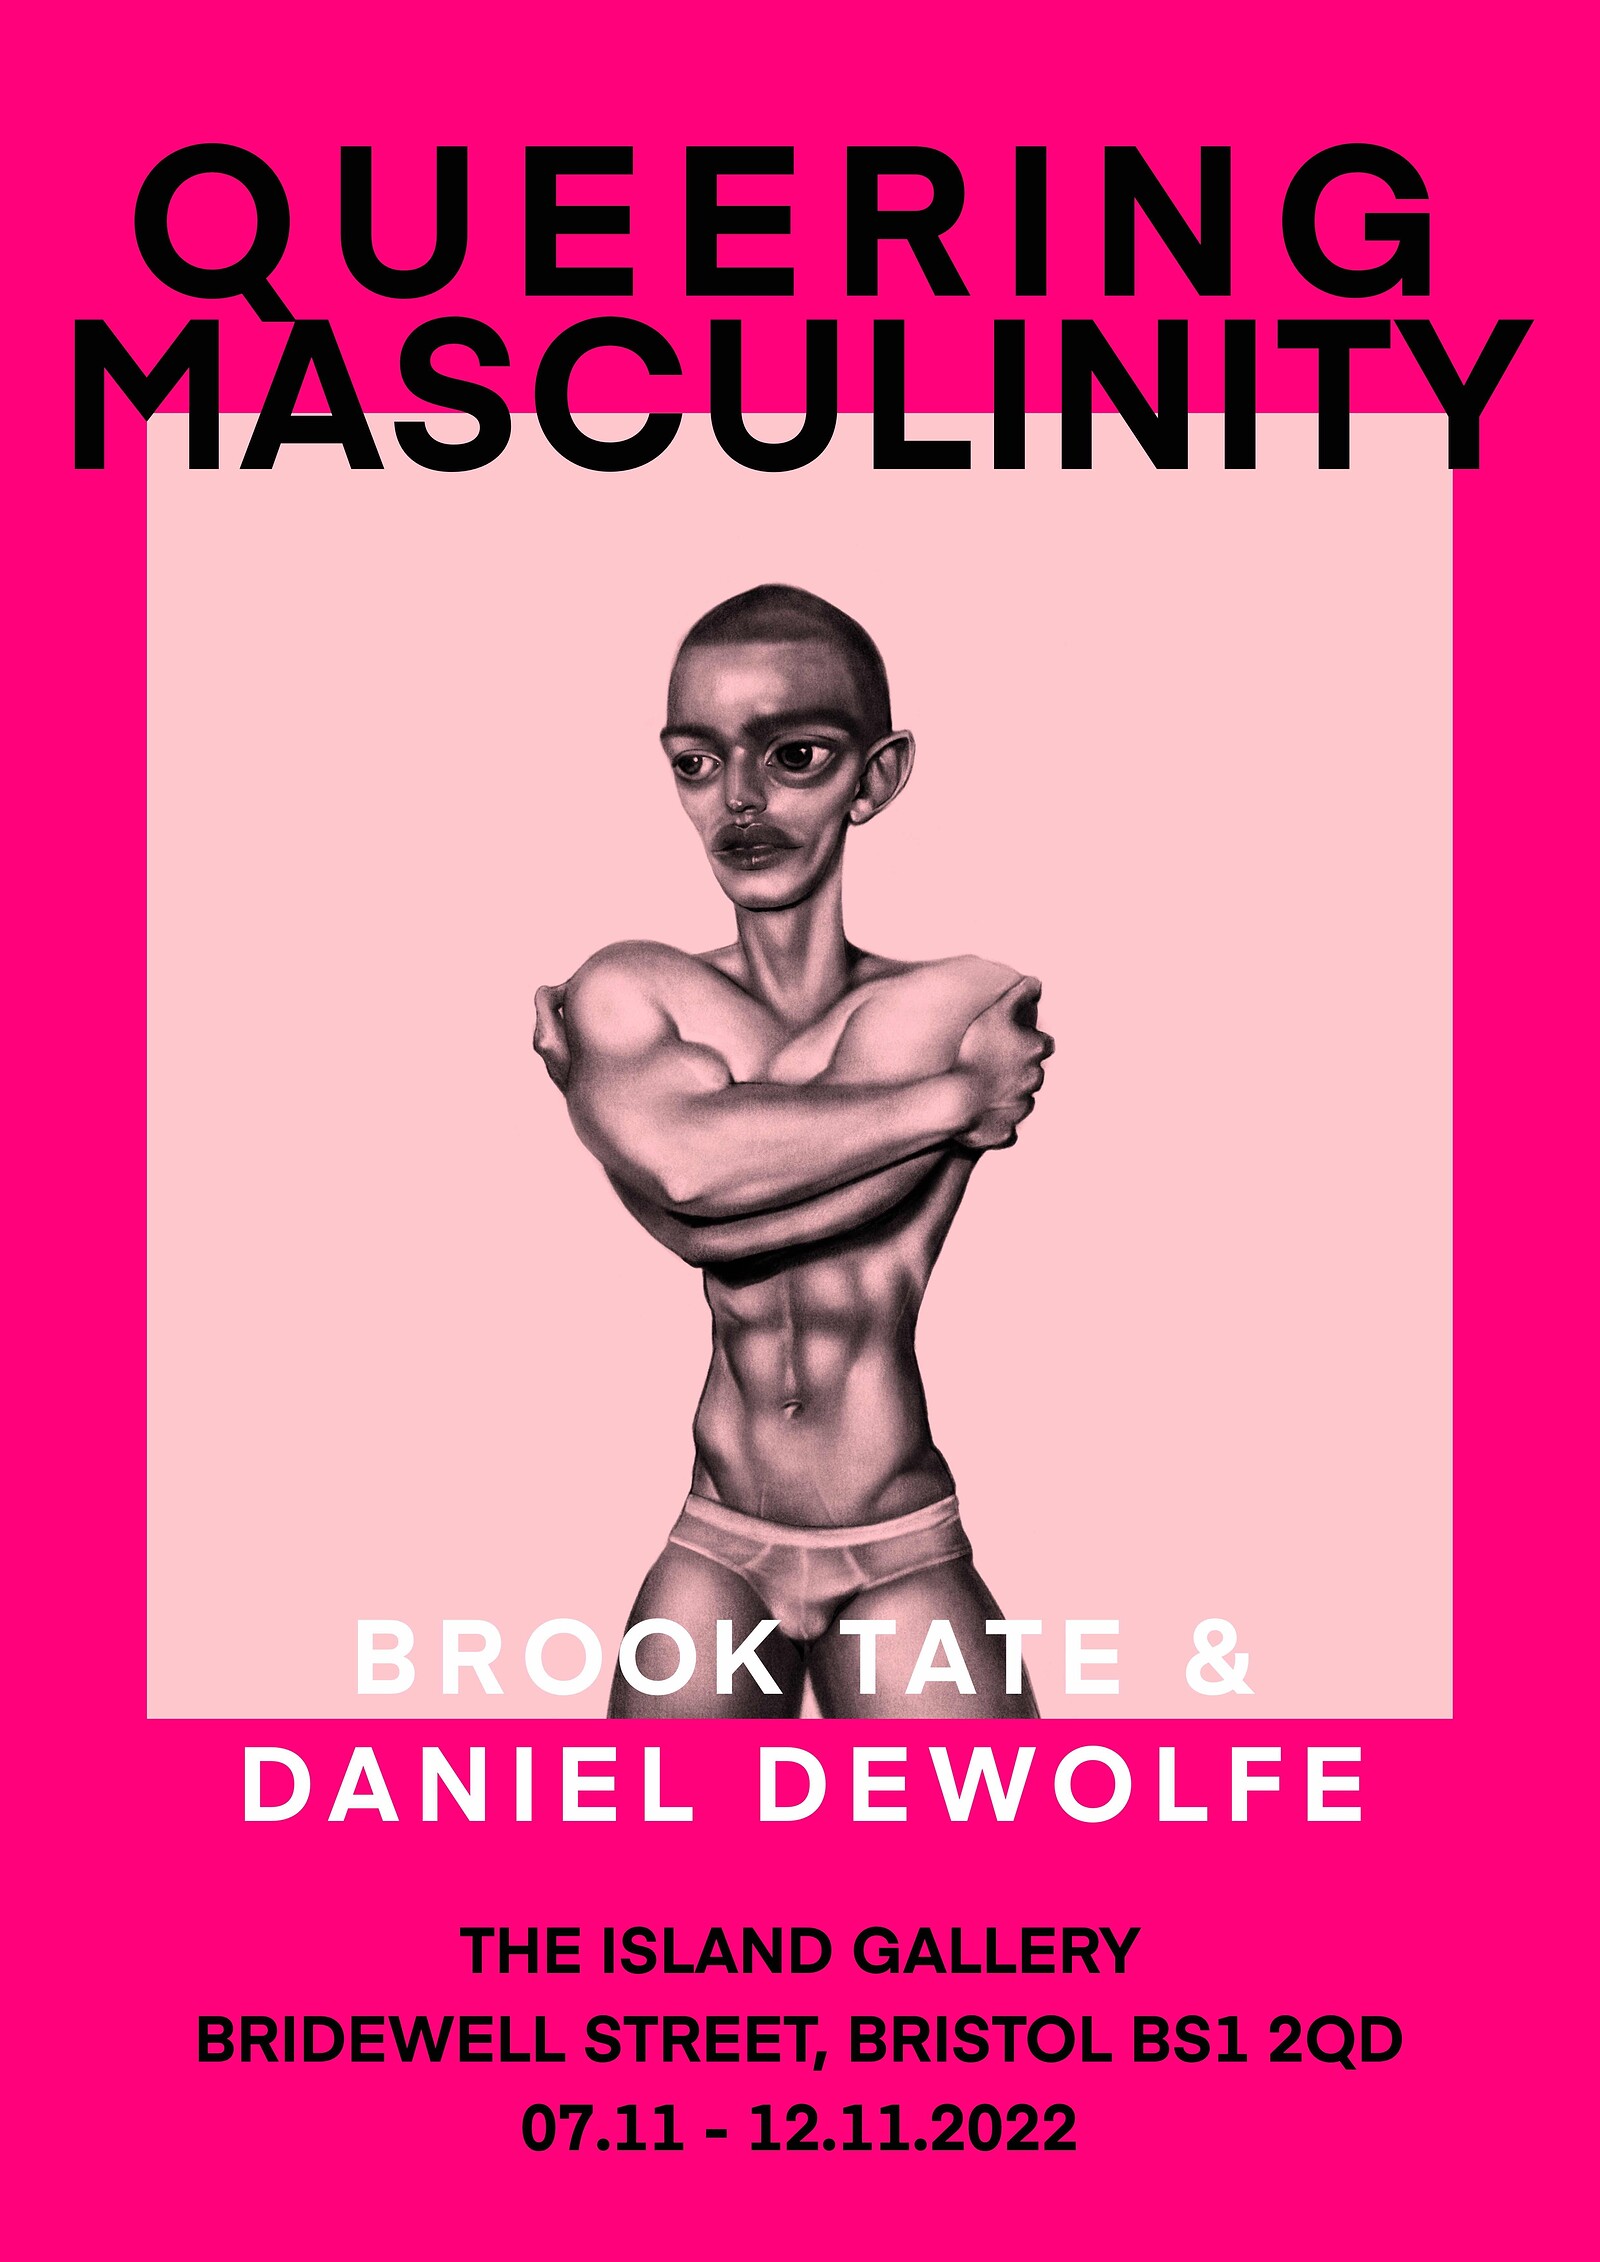 QUEERING MASCULINITY at The Island